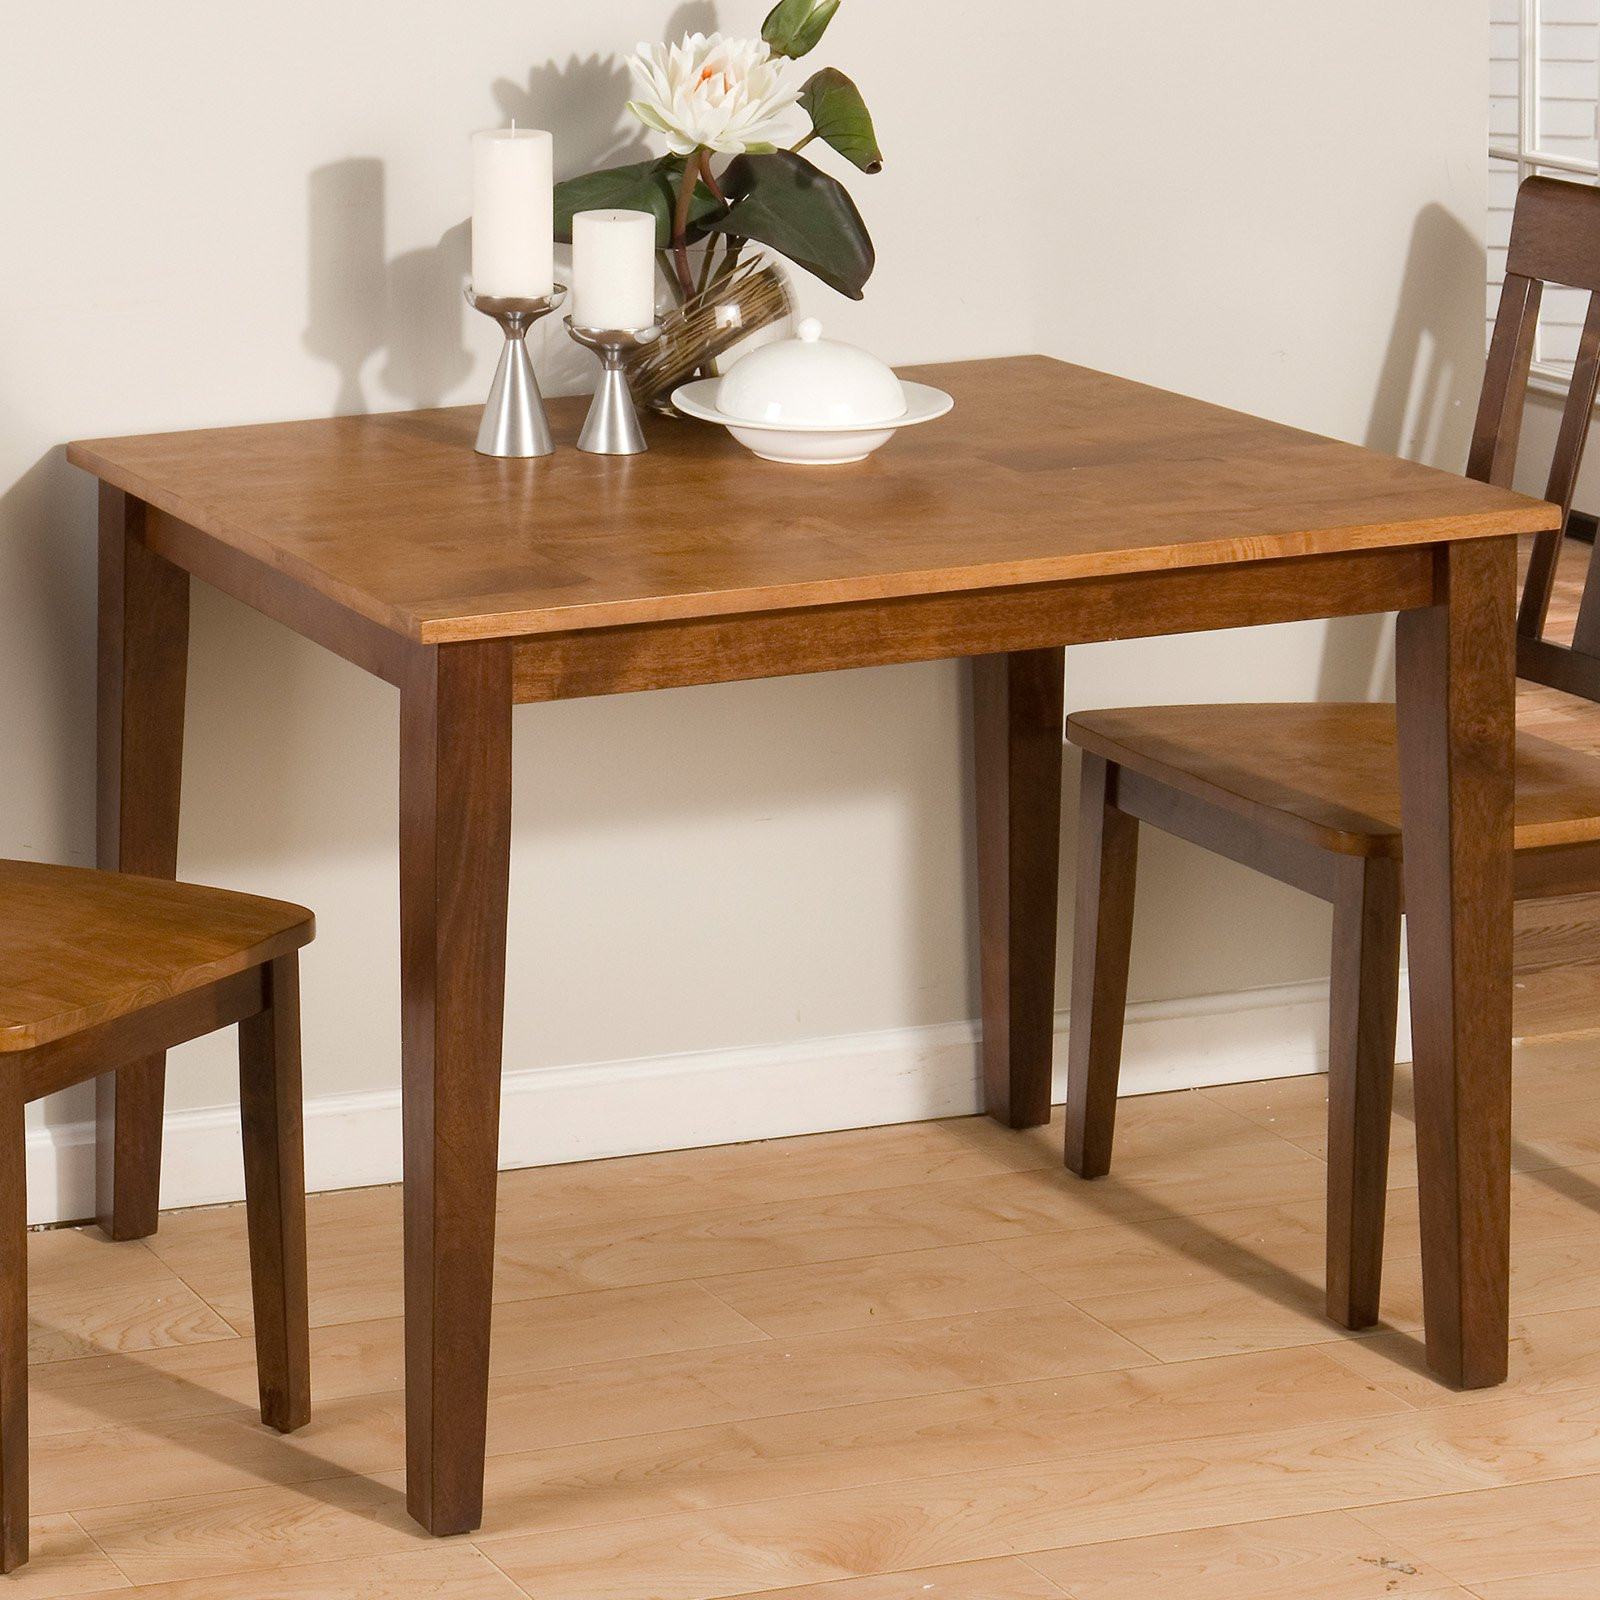 Small Kitchen Tables With Bench
 Small Rectangular Kitchen Table – HomesFeed